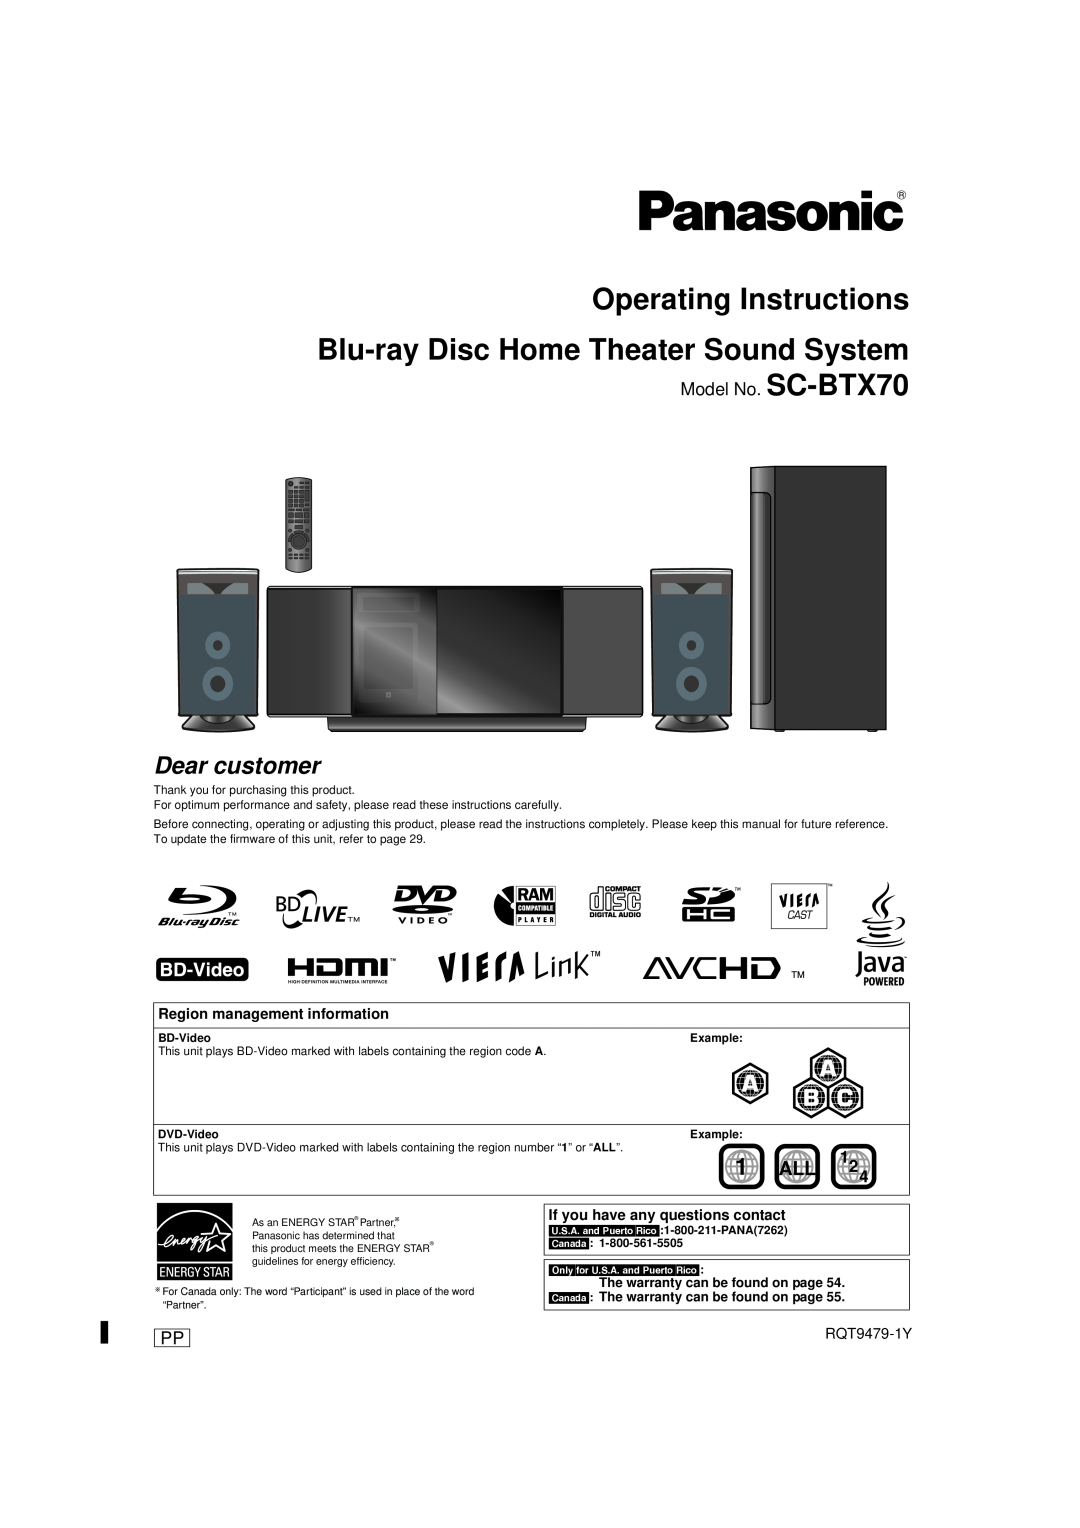 Panasonic warranty Model No. SC-BTX70, Region management information, If you have any questions contact, RQT9479-1Y 